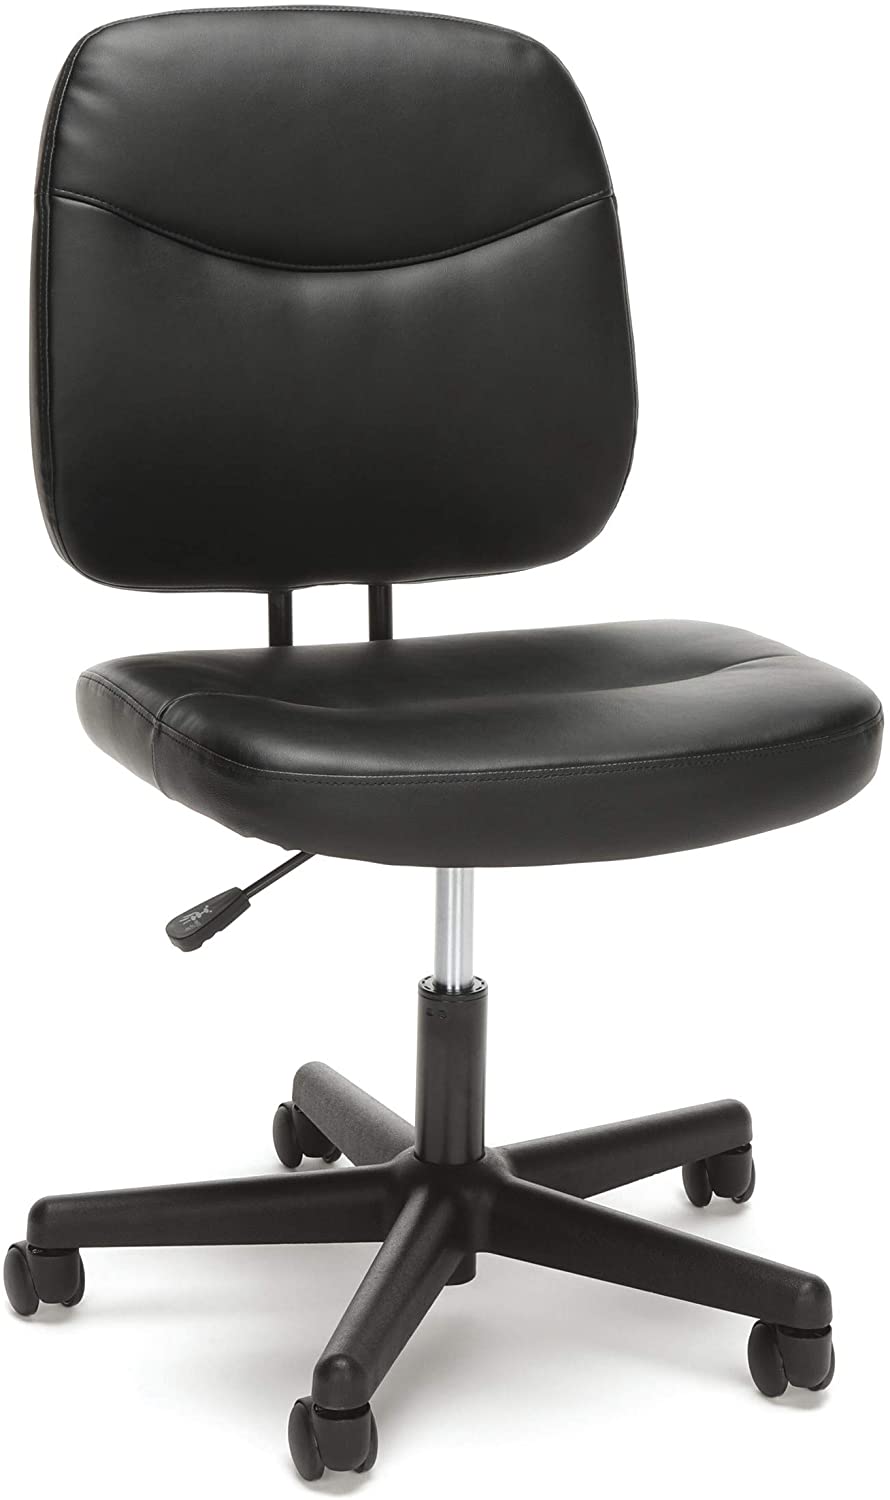 OFM Essentials Collection Armless Leather Desk Chair, in Black